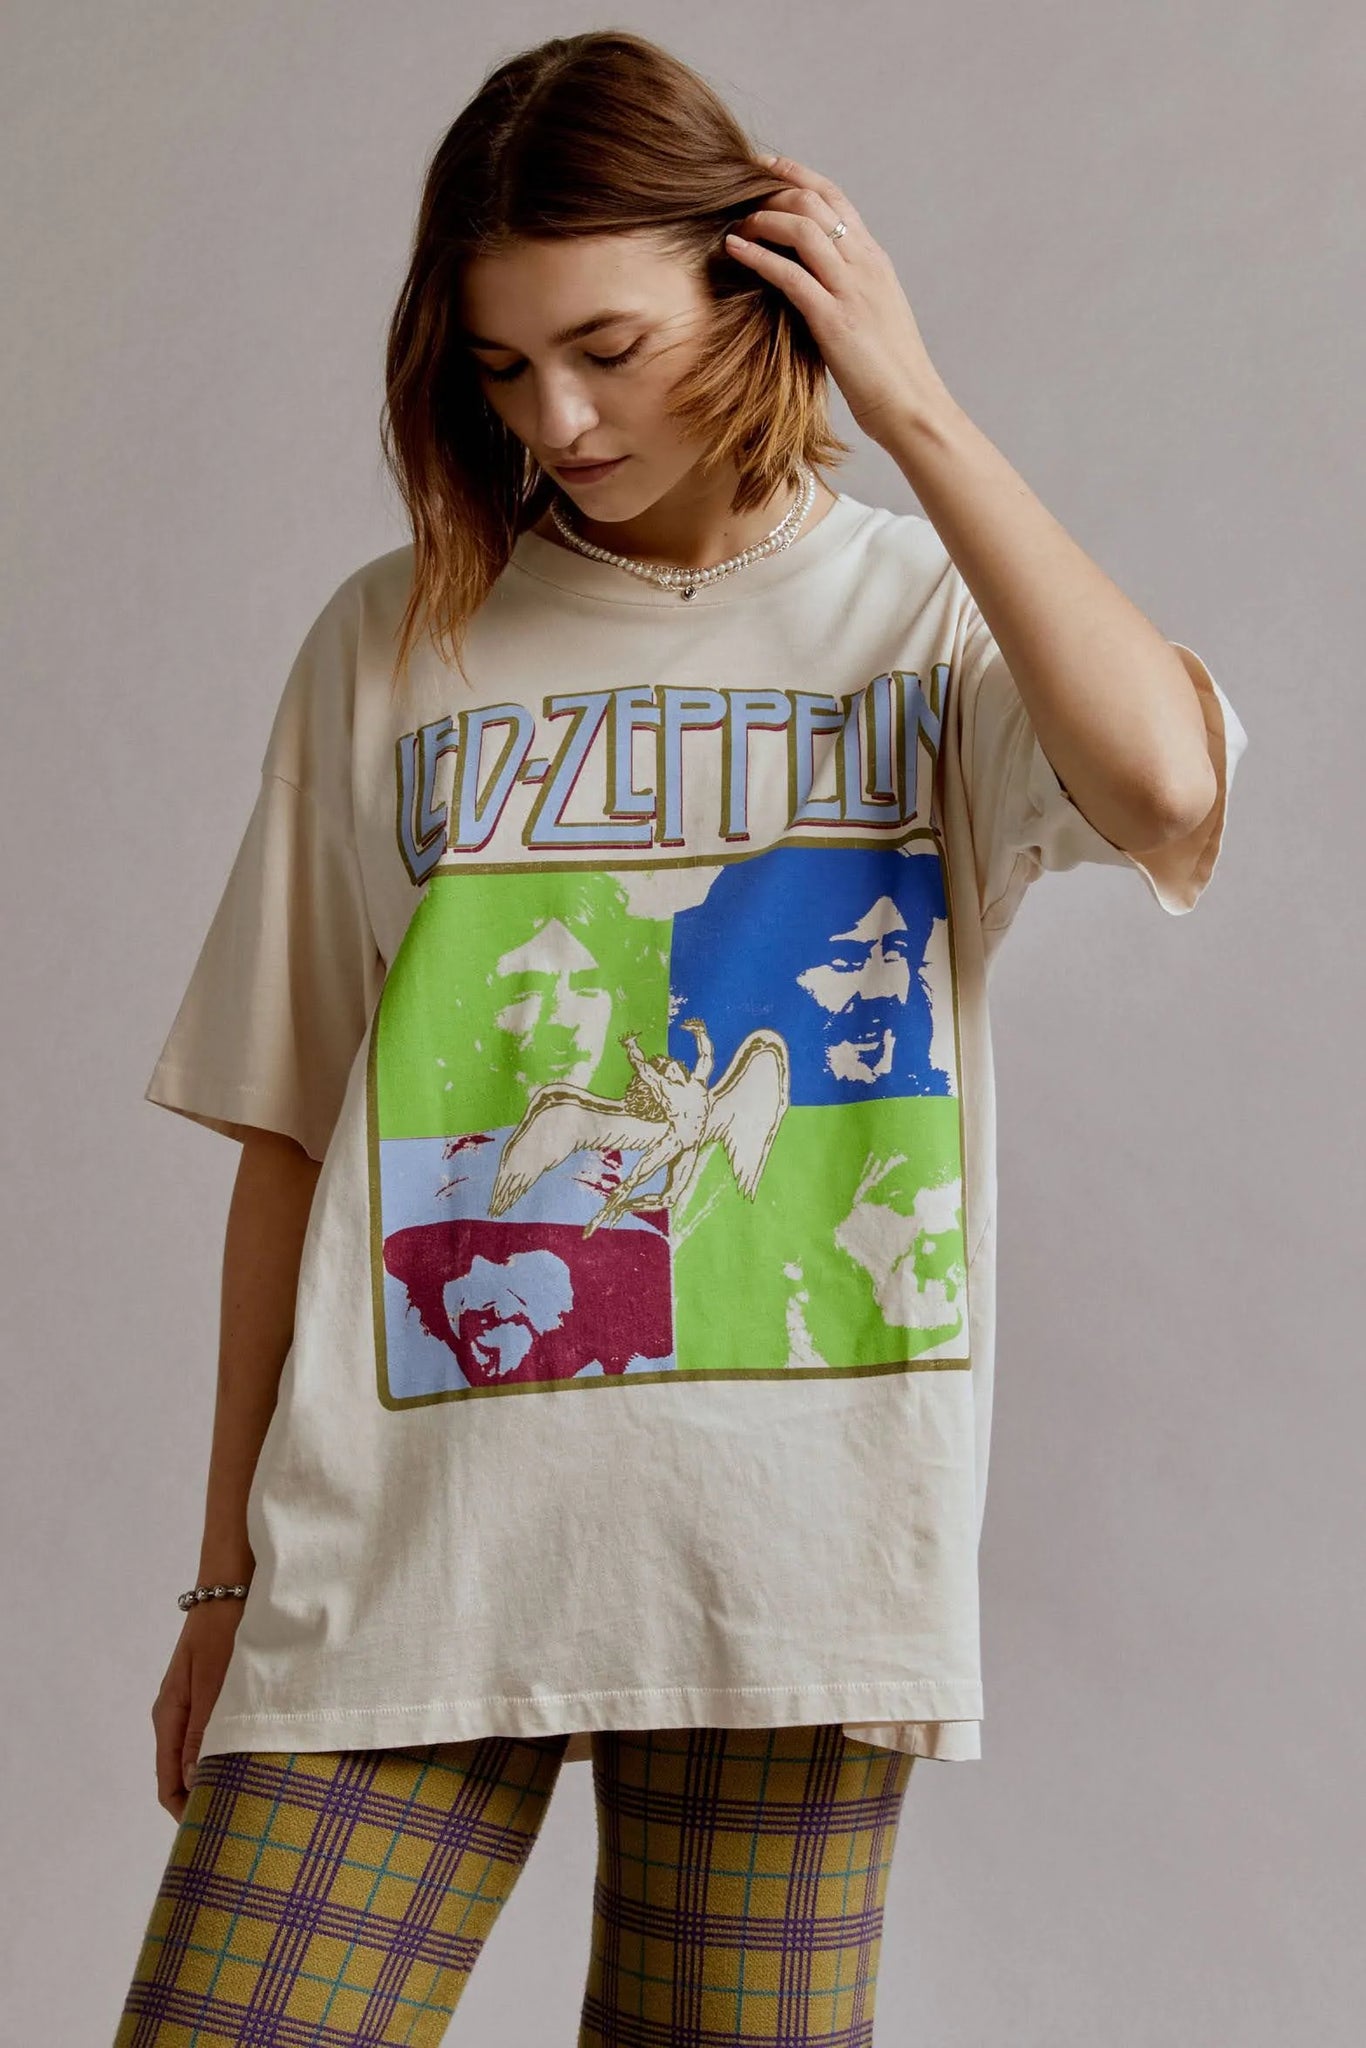 Led Zeppelin Four Square Merch Tee